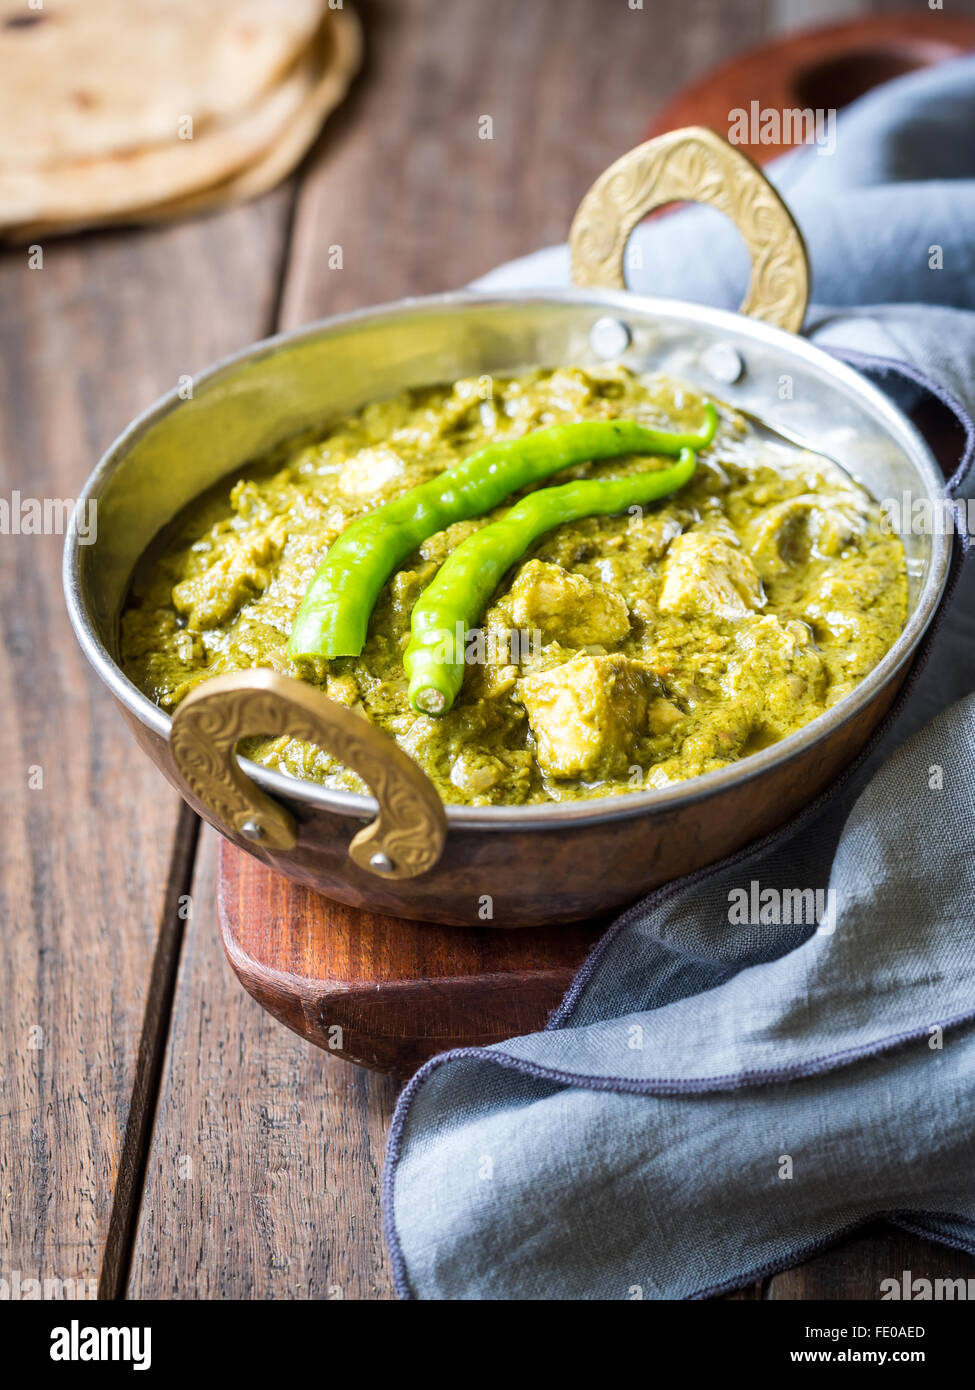 Indian cuisine: palak paneer in traditional copper bowl served with tandoori roti on a dark wooden table. Stock Photo